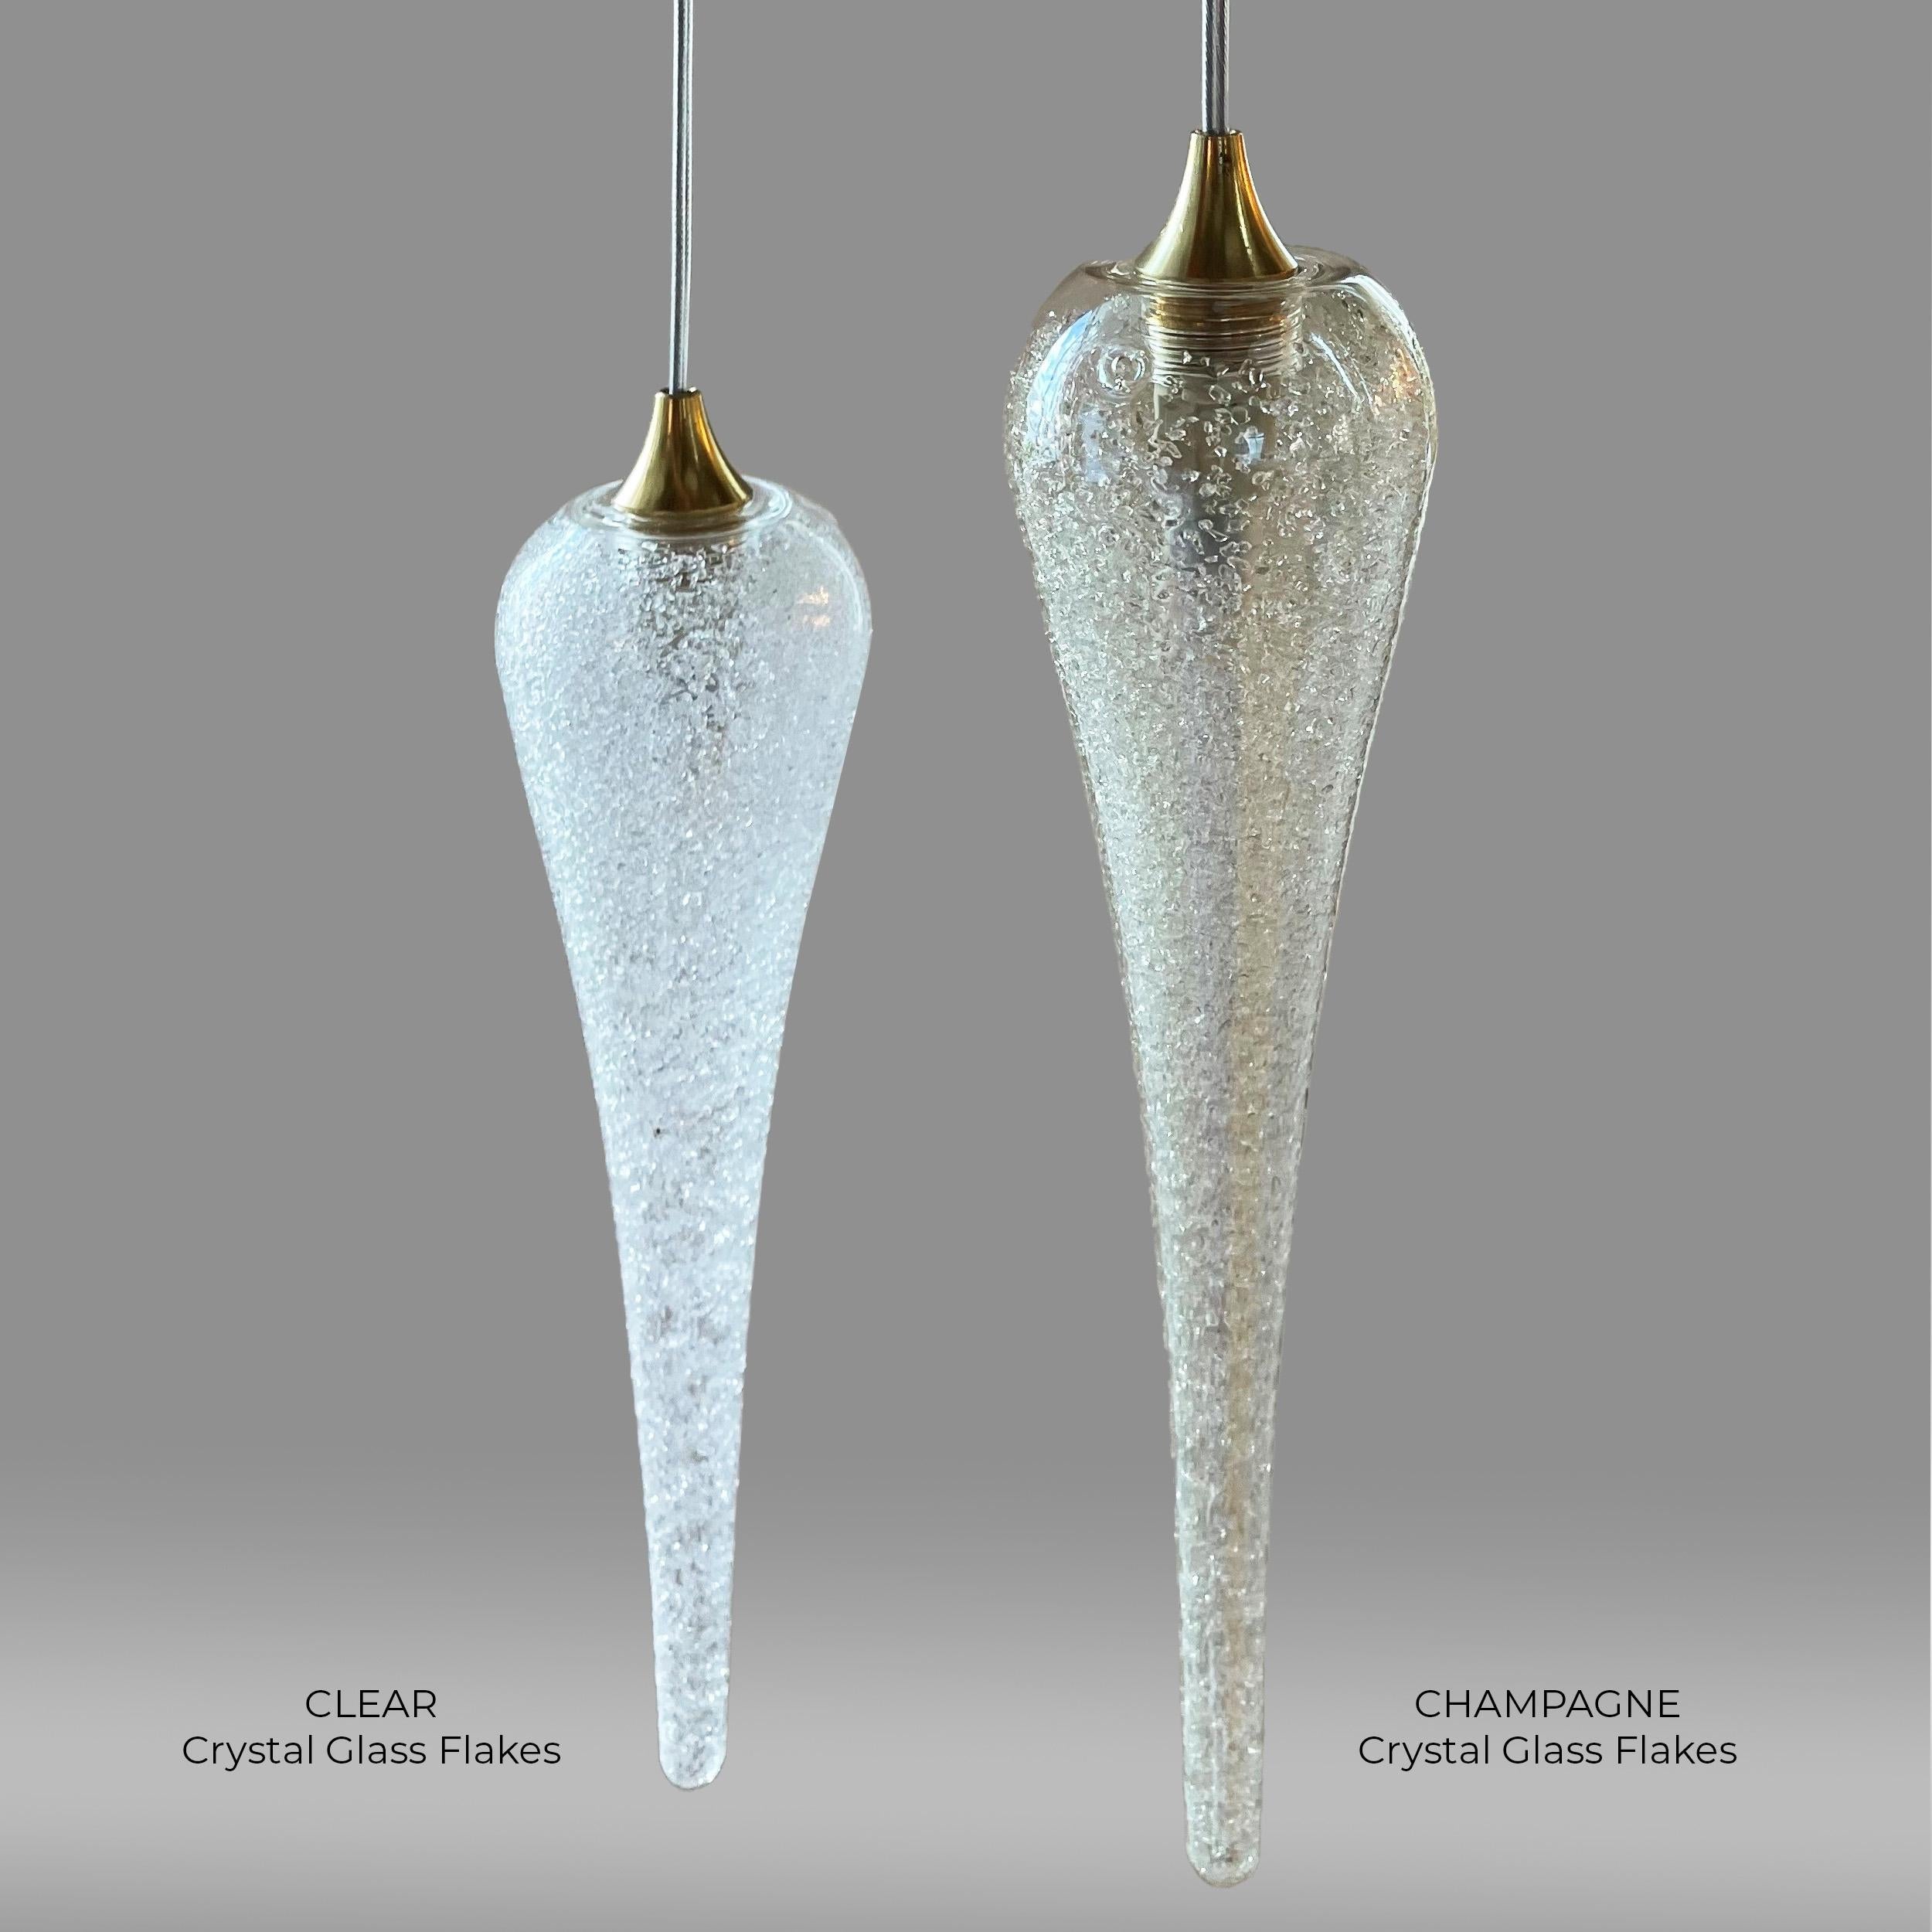 ICICLE Artisanal Hand-Blown Glass Chandelier, 9 Crystal Flakes Pendants LED In New Condition For Sale In Hollywood, FL